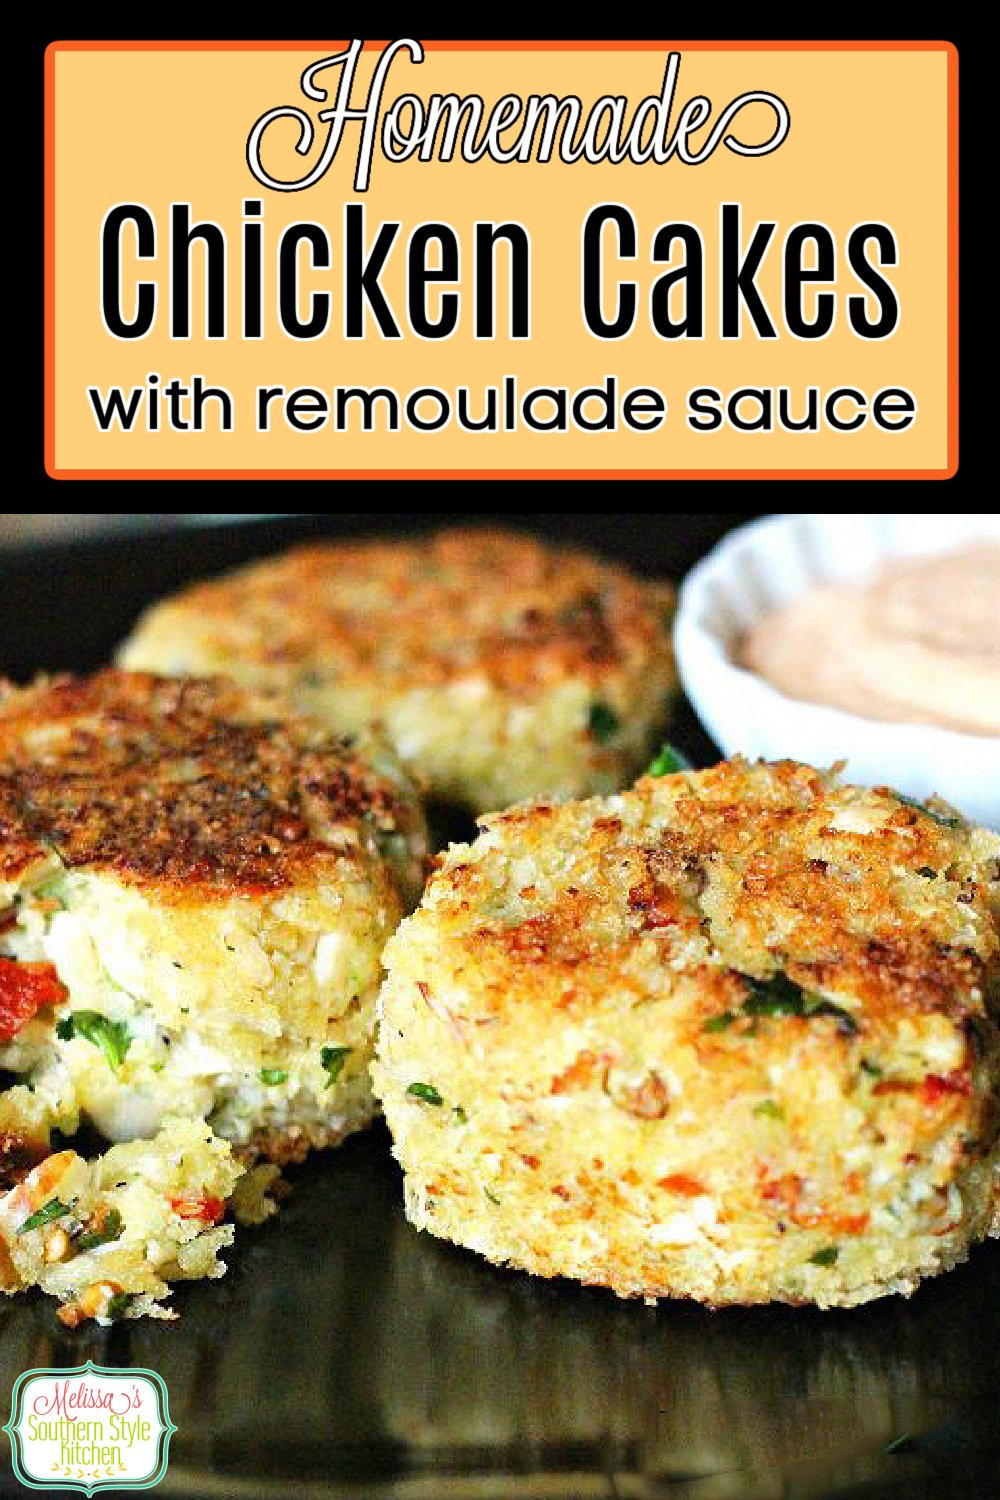 Chicken Cakes and Remoulade Sauce are a spectacular money saving dinner option #chickencakes #chicken #chickenrecipes #easydinnerideas #chickenbreastrecipes #dinner #southernrecipes #southernfood #melissassouthernstylekitchen via @melissasssk